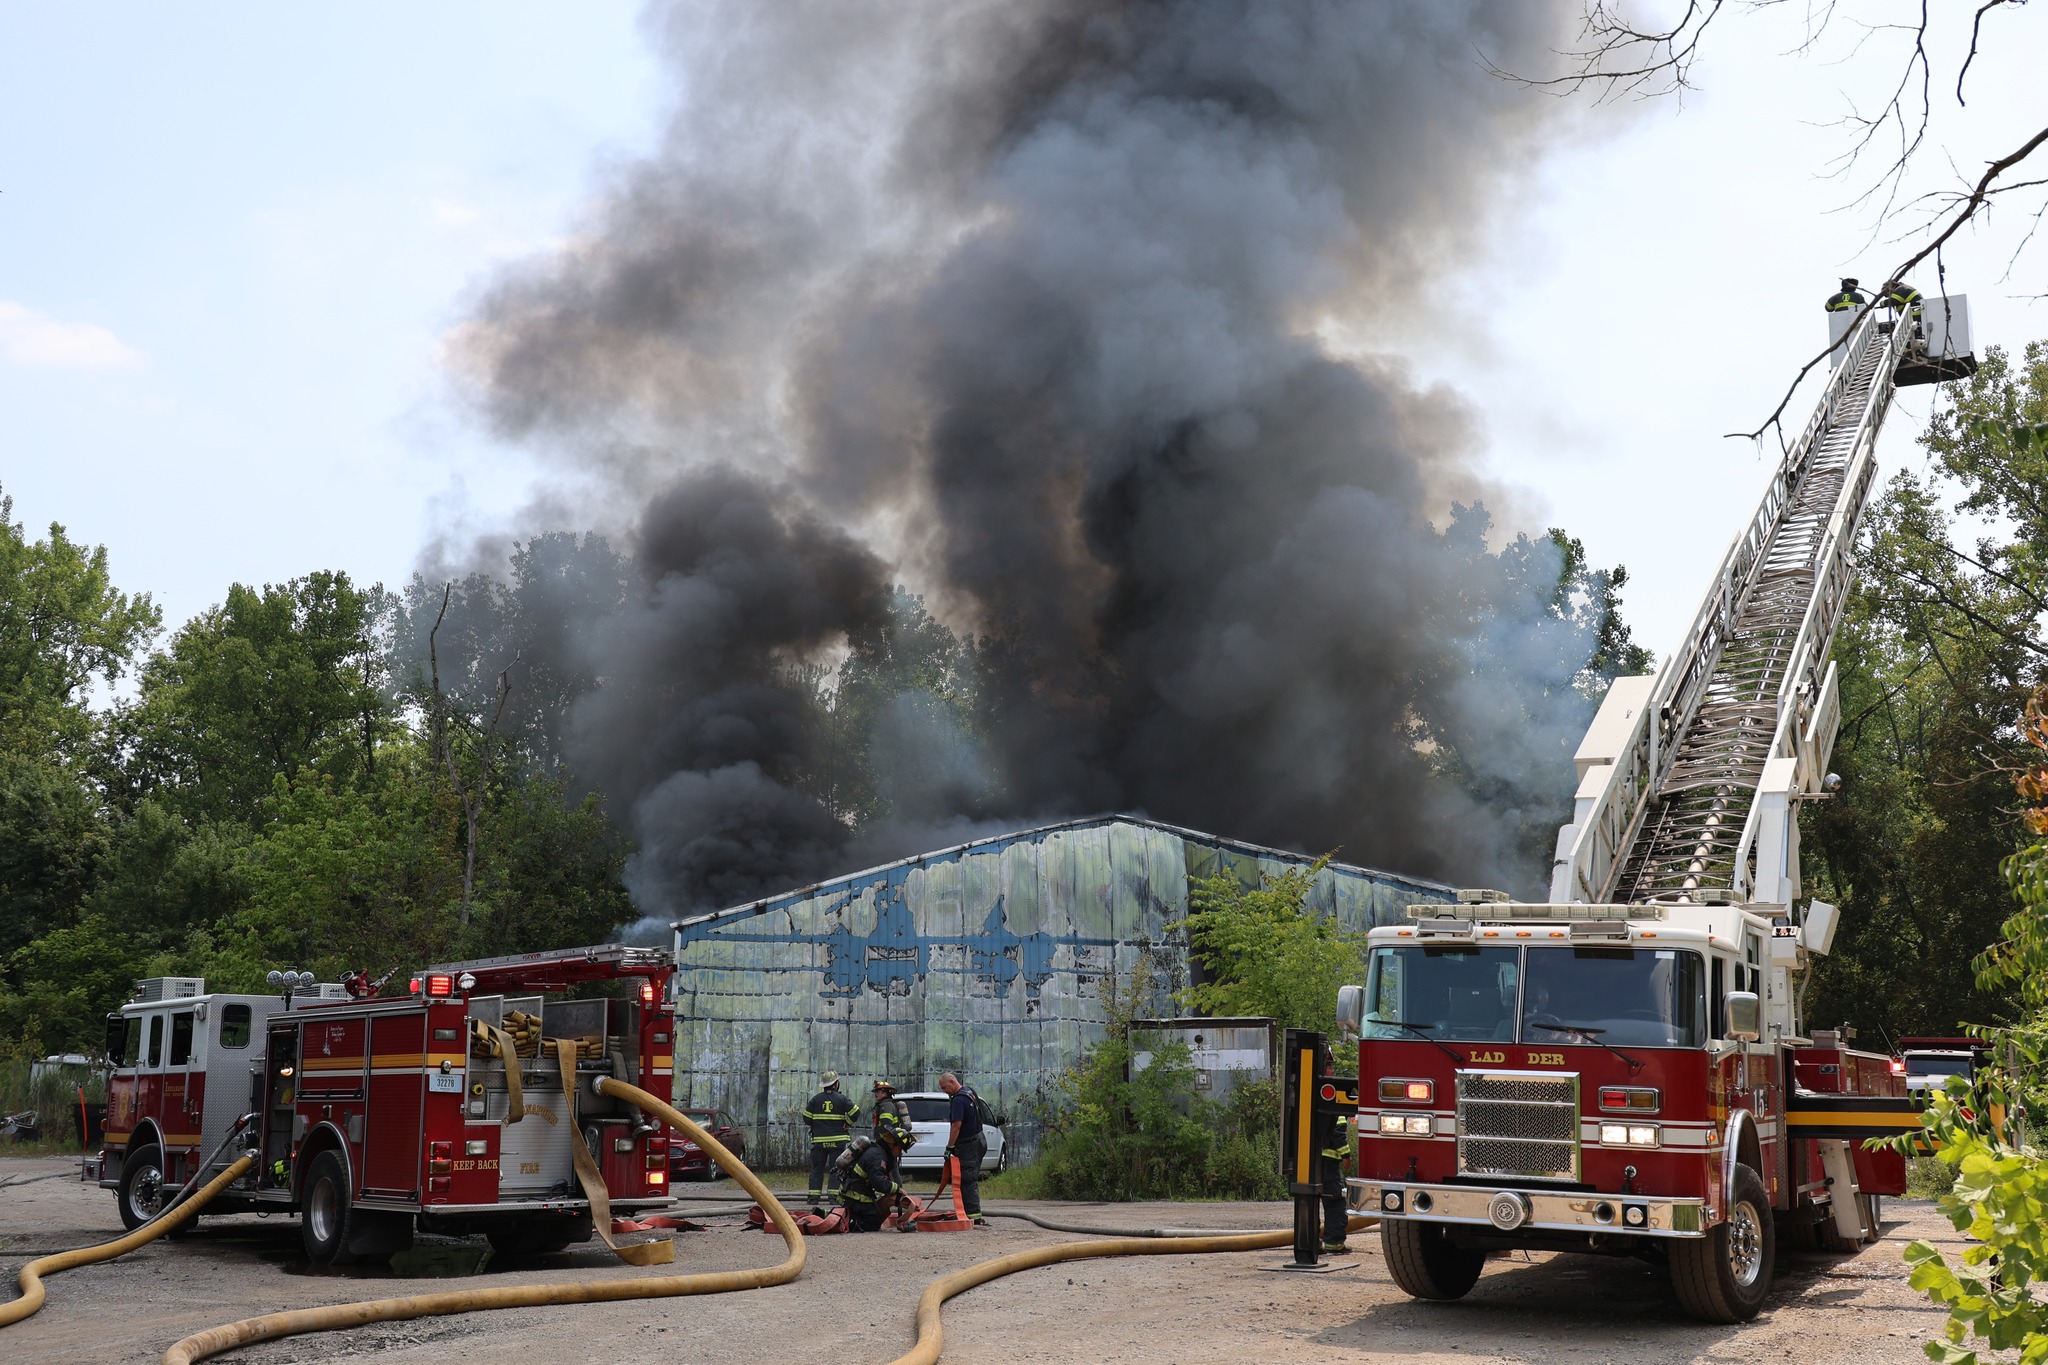 Pole barn fire leaves 1 firefighter injured, causes large plume of ...